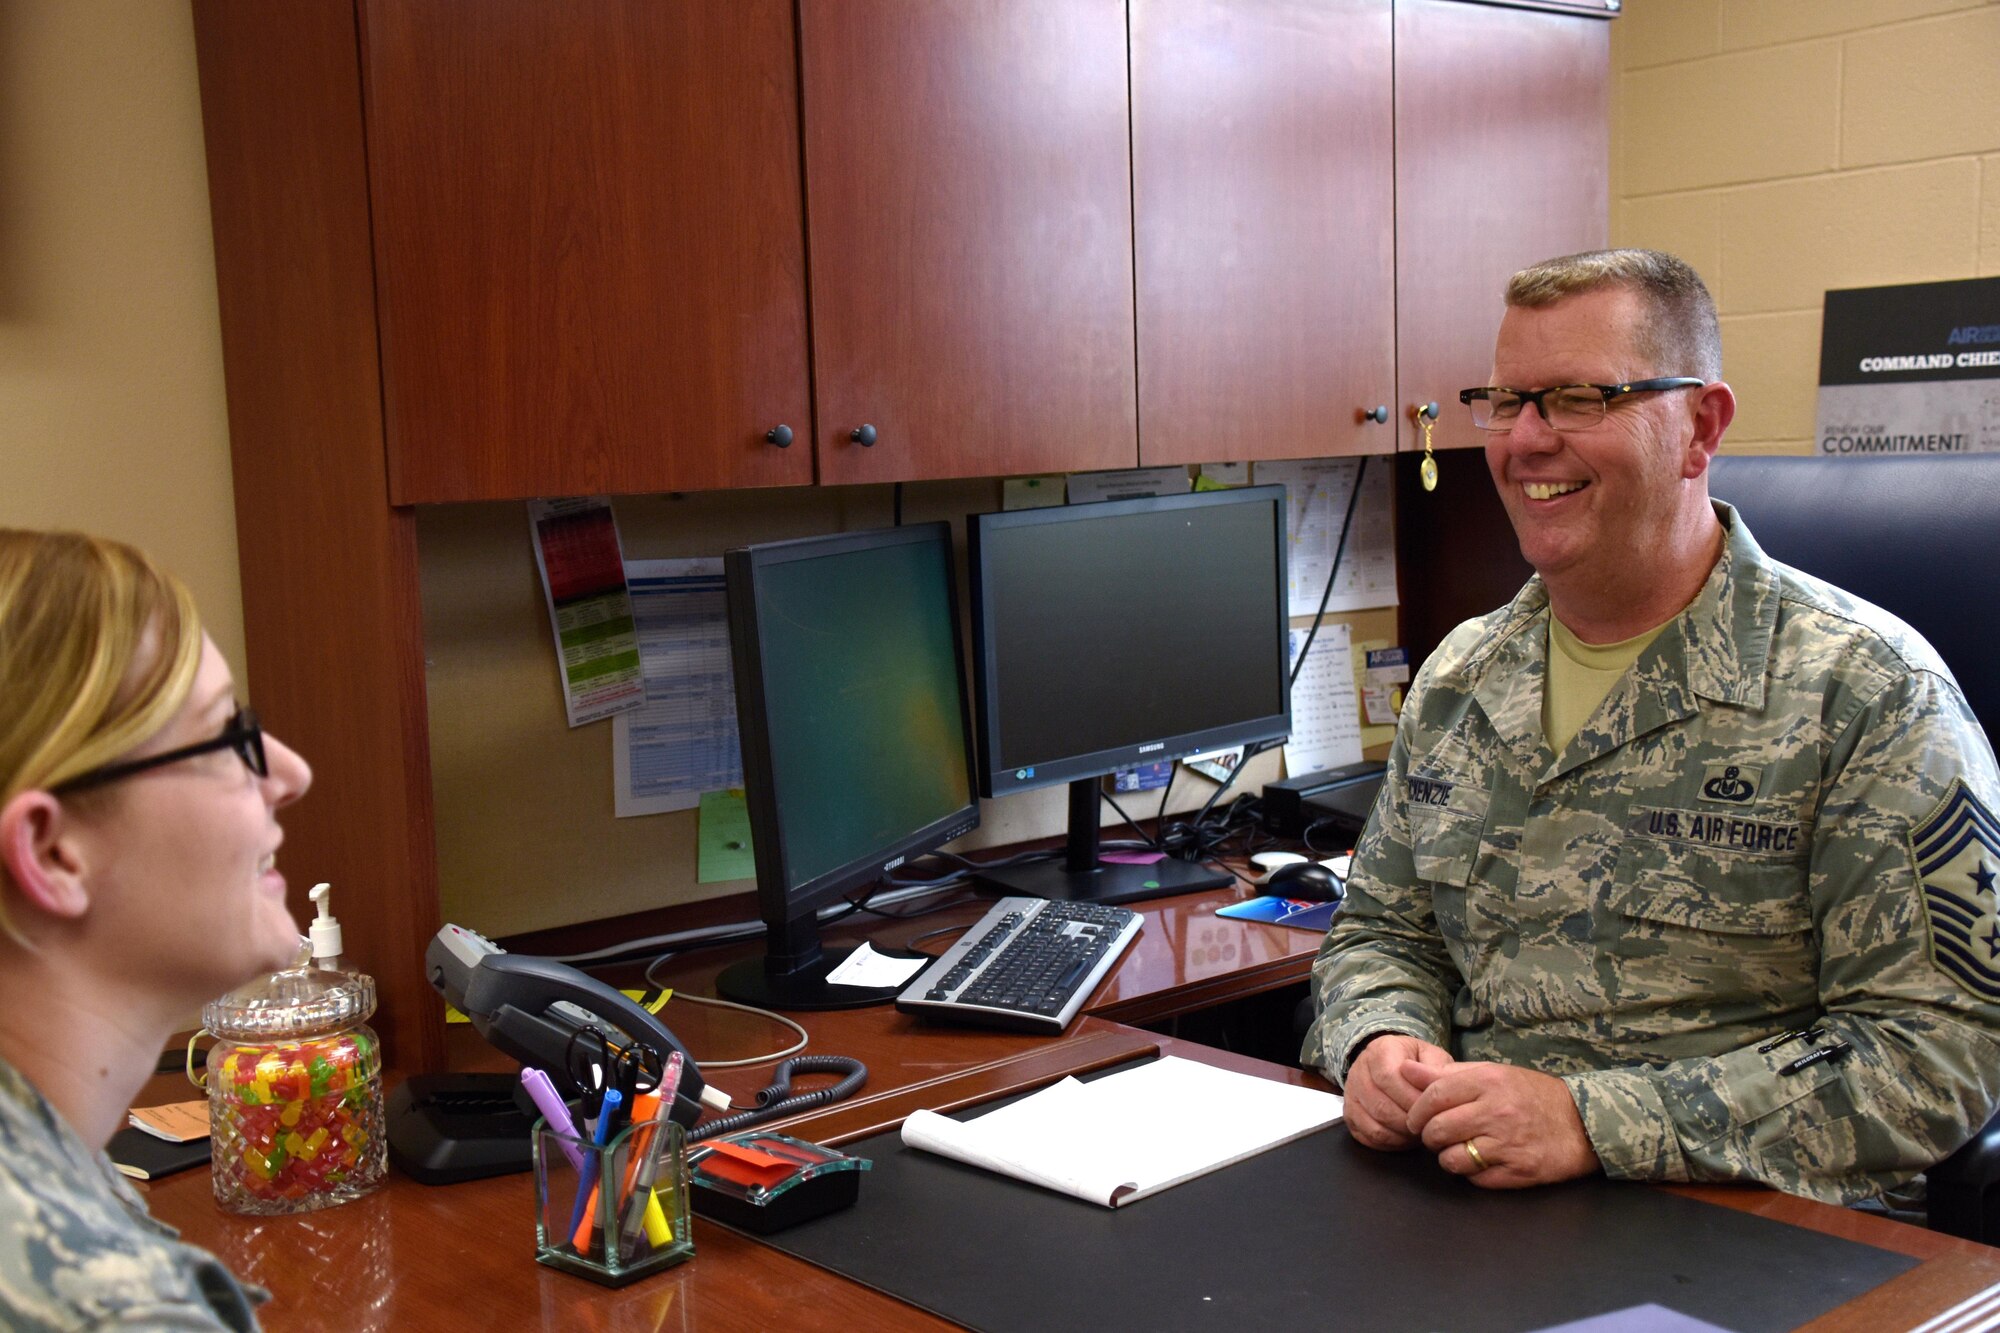 The outgoing 178th Wing Command Chief, Chief Master Sgt. Scott McKenzie, reflects on his nearly 37 years in the Air National Guard as he approaches retirement at Springfield Air National Guard Base in Ohio, May 26, 2017. McKenzie served as the 178th Command Chief for more than two years. (Ohio Air National Guard photo by Senior Airman Rachel Simones)